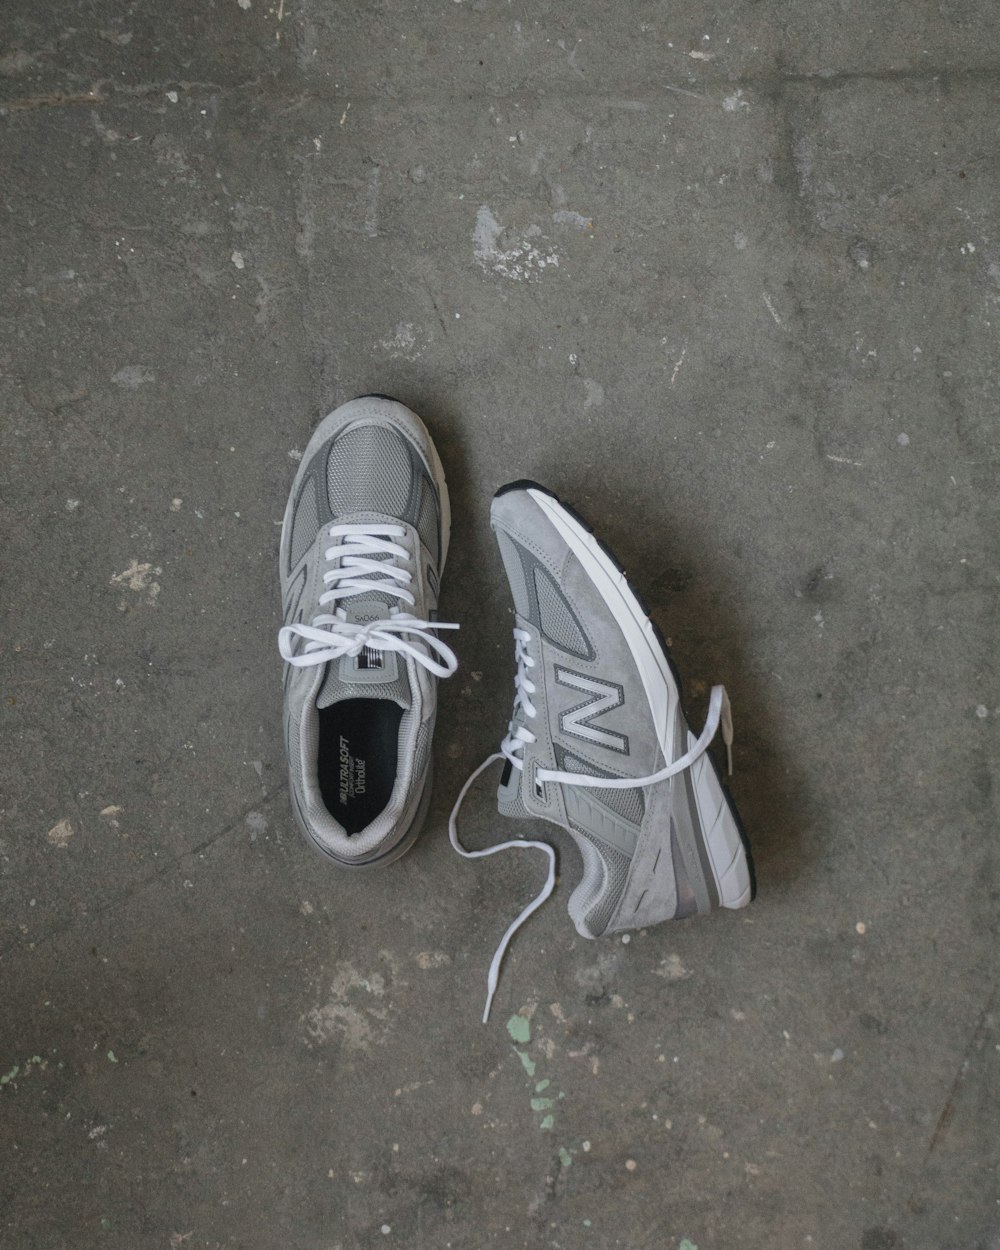 a pair of grey and white tennis shoes